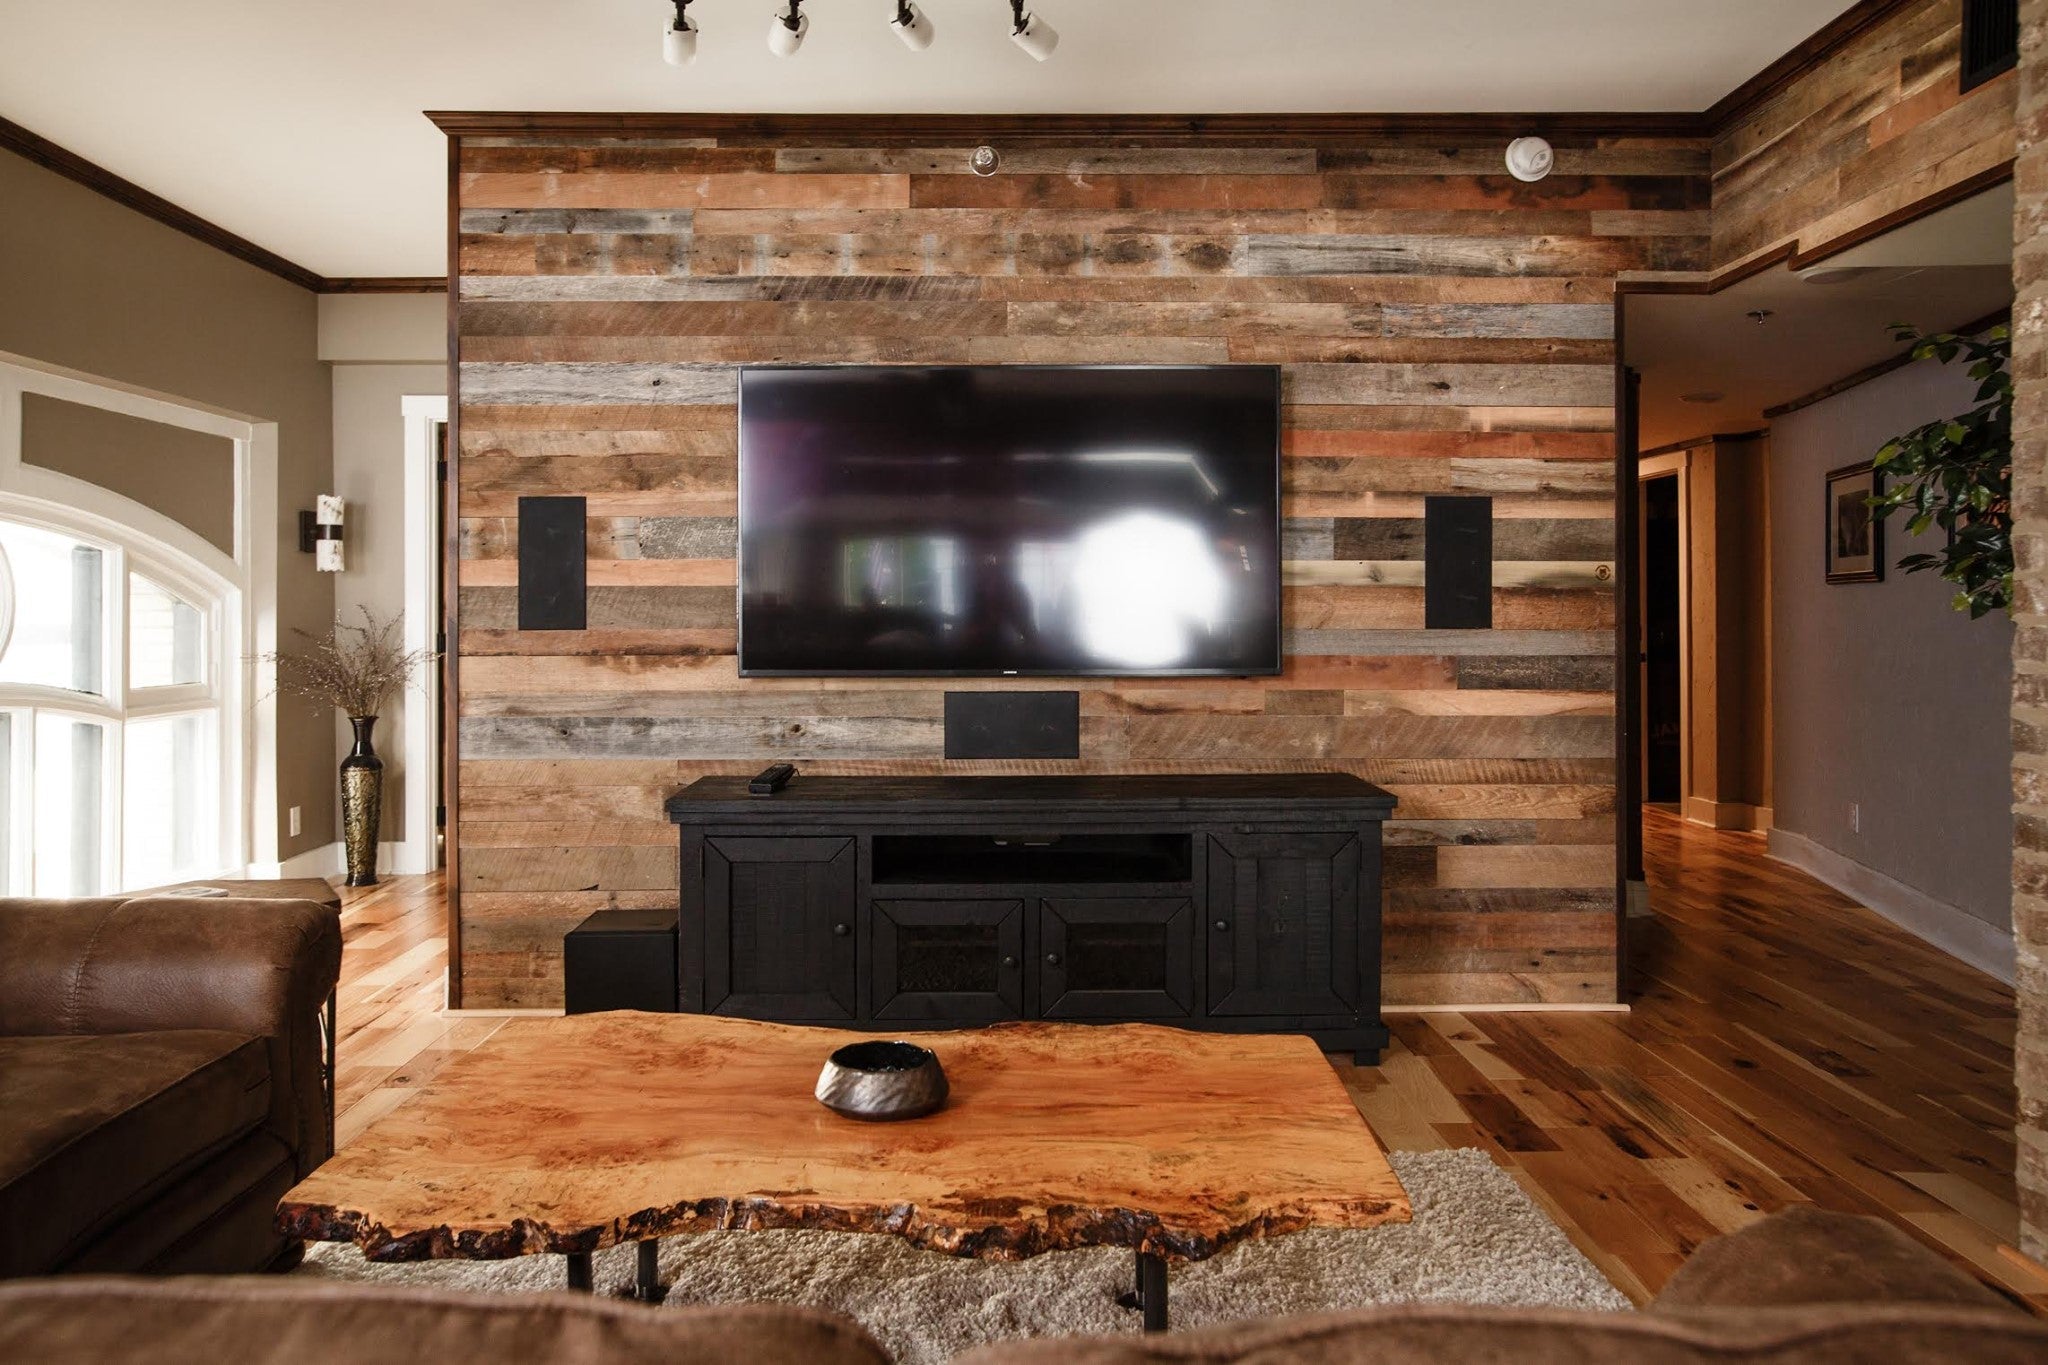 How to Get a High-End Barn Wood Accent Wall for a Low Price